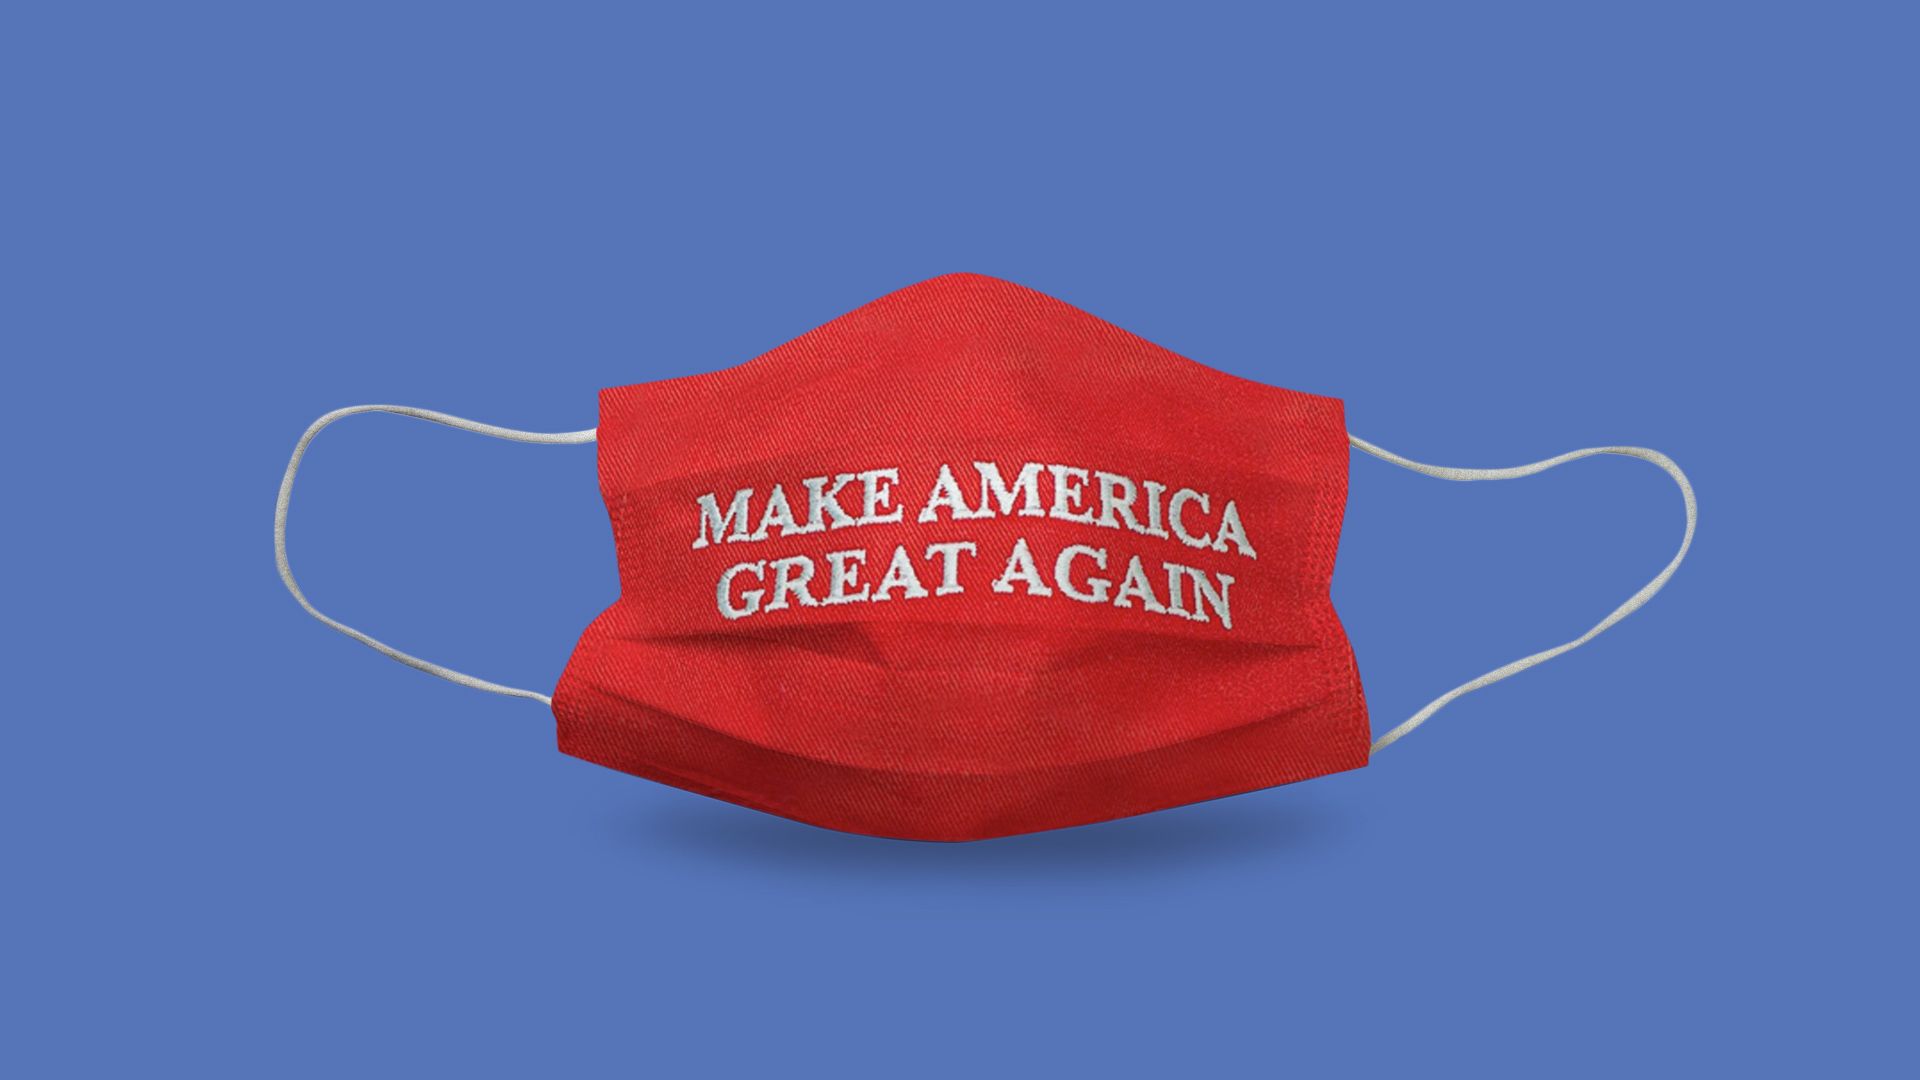 Illustration of a surgical mask with Make America Great Again written on it.